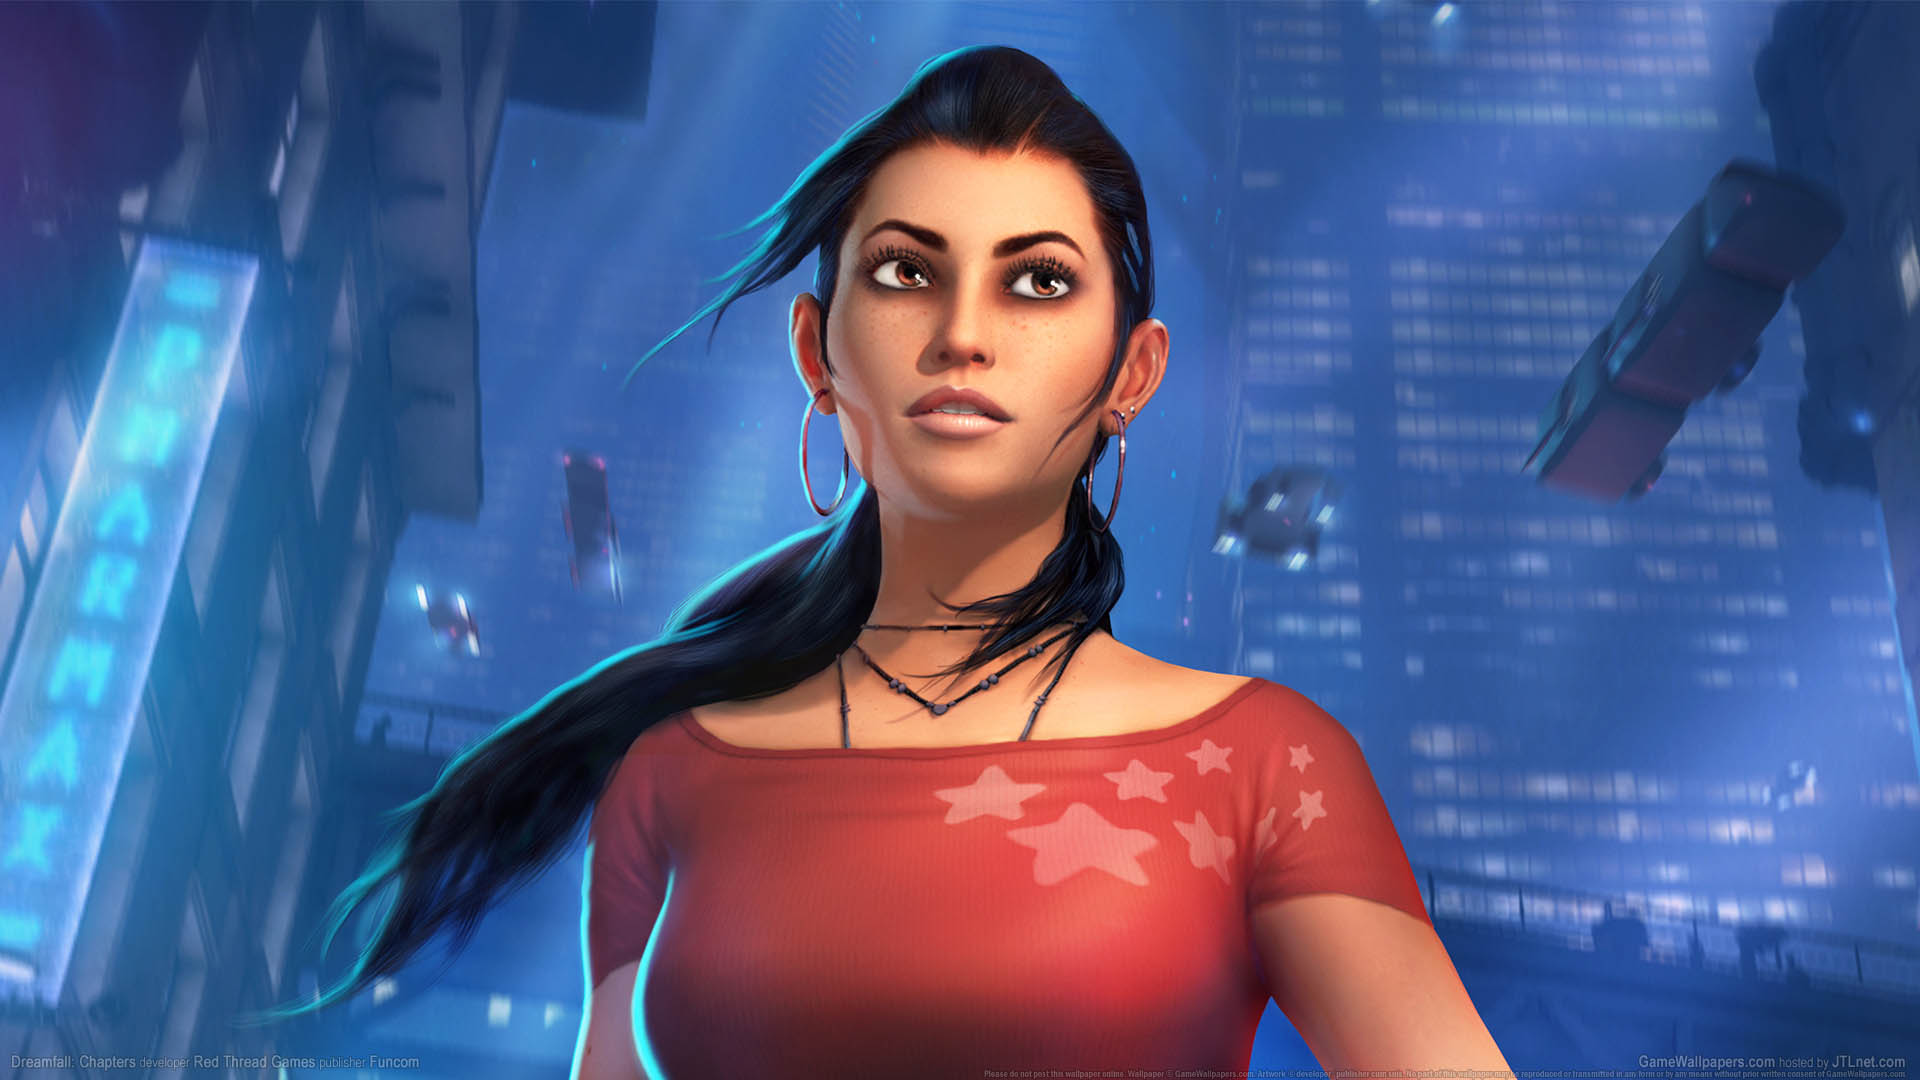 Dreamfall: Chapters achtergrond 02 1920x1080